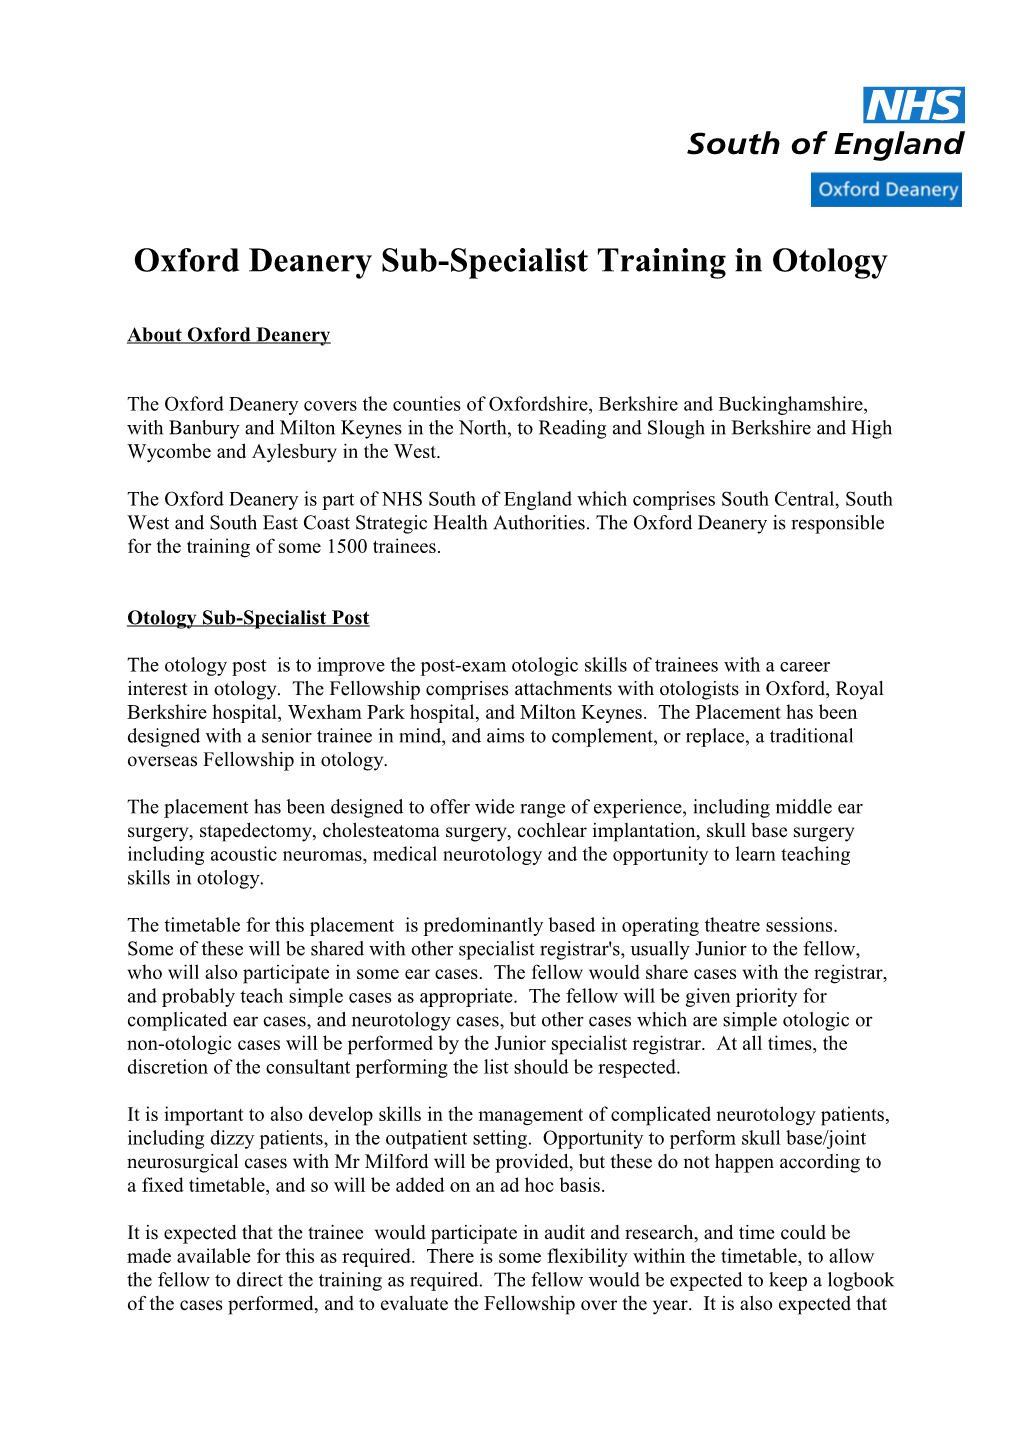 Oxford Deanery Sub-Specialist Training in Otology